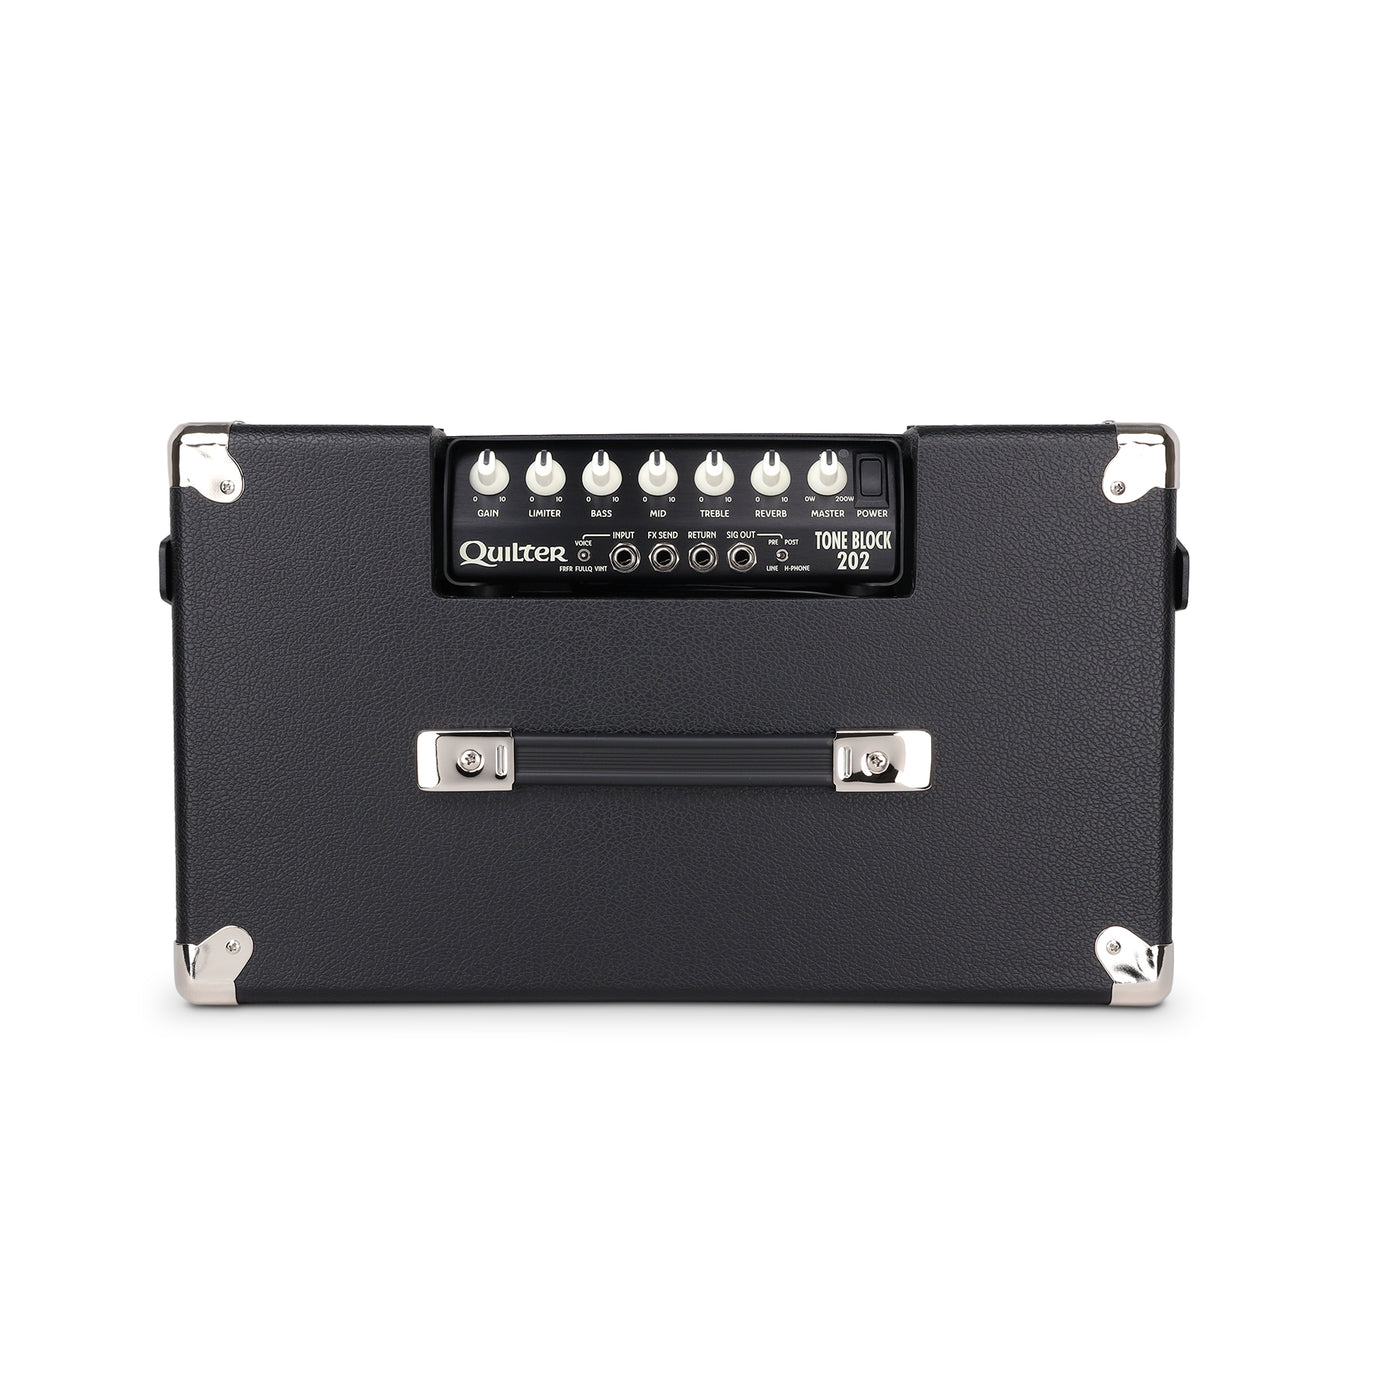 Quilter Labs Travis Toy 12 amplifier - top view